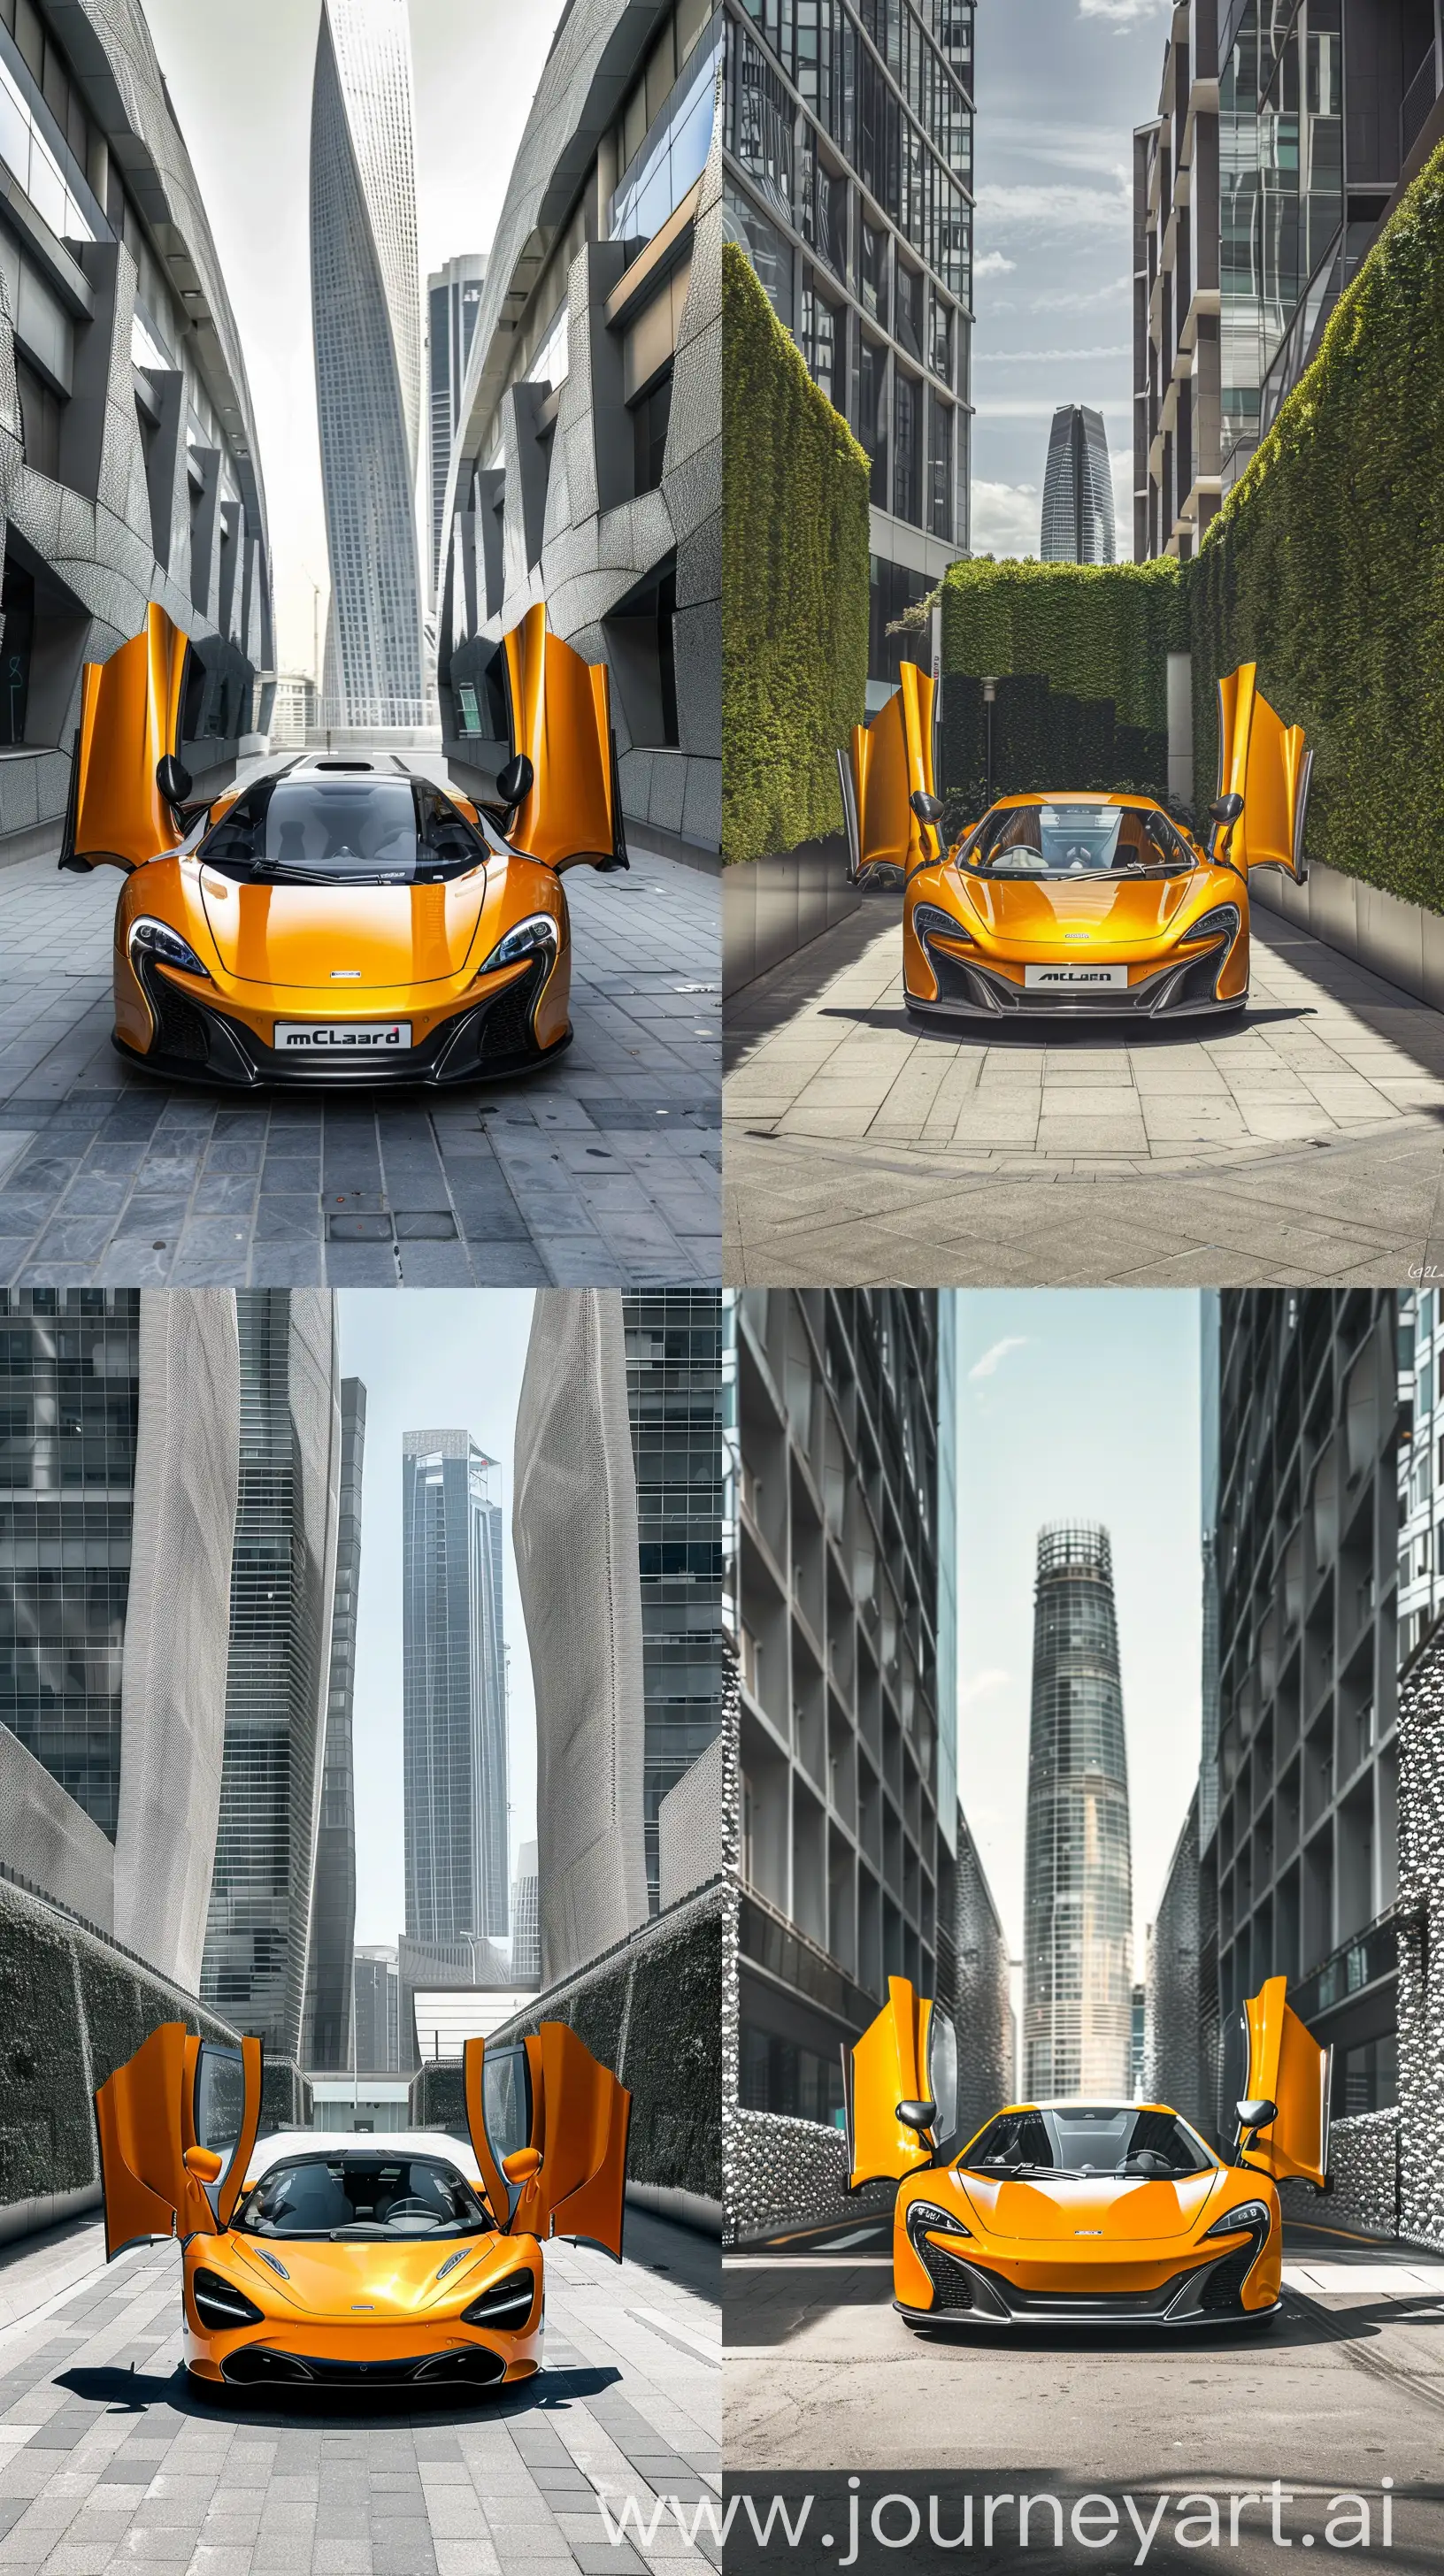 Vibrant-McLaren-Supercar-with-Opened-Doors-and-Urban-Skyline-Background